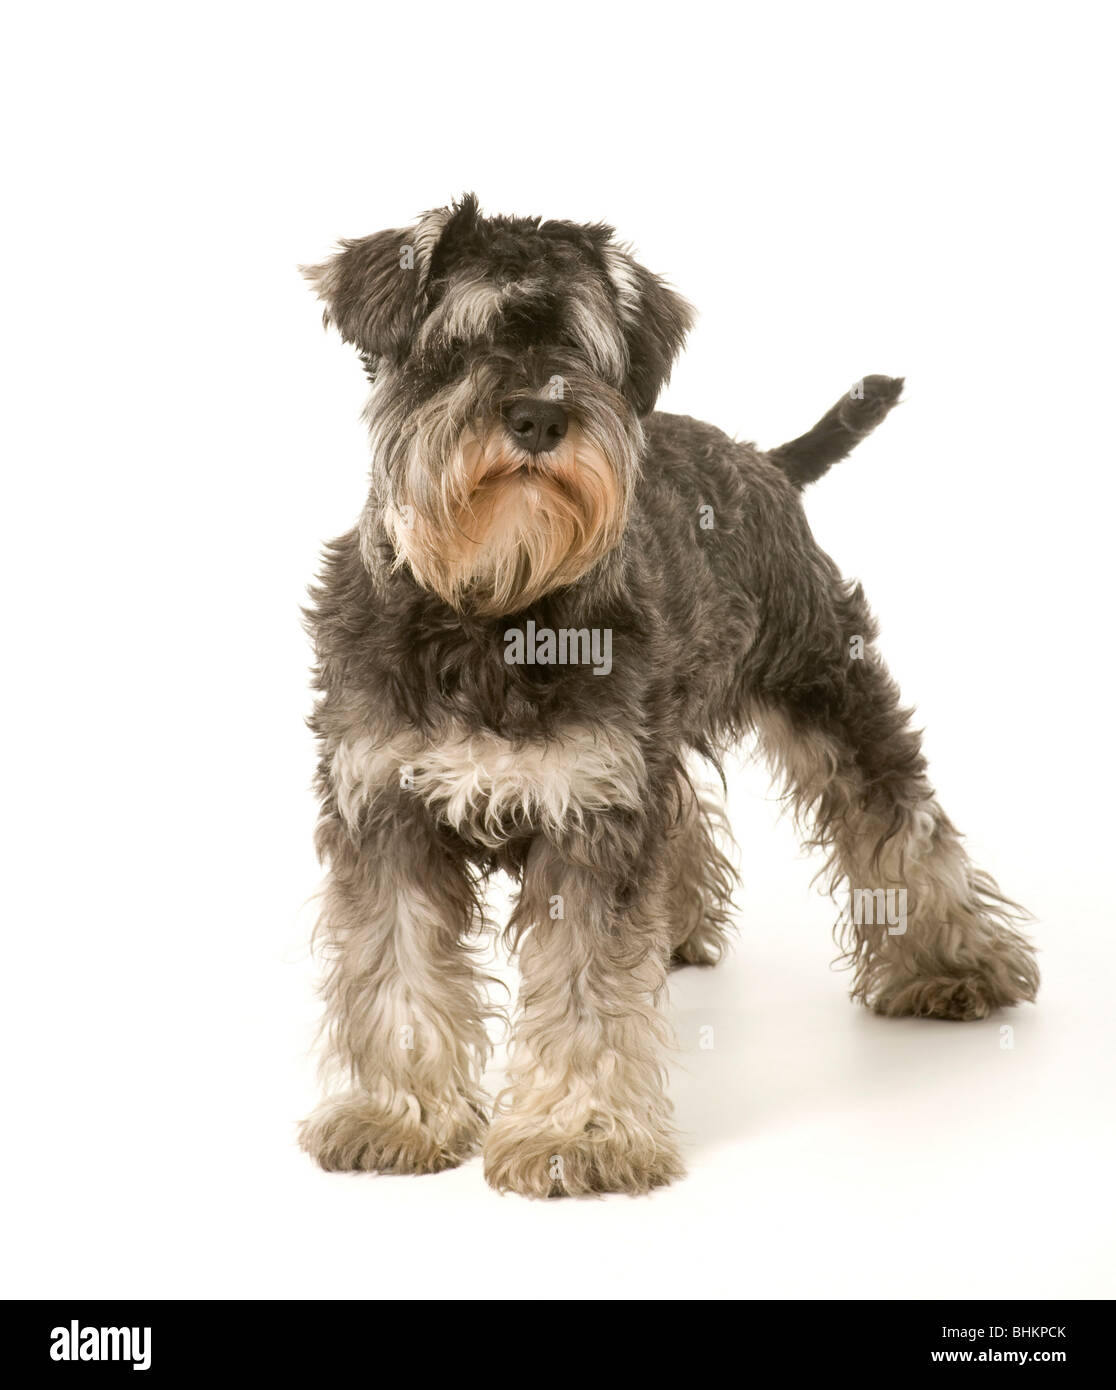 Salt and Pepper coloured Miniature Schnauzer dog standing  on white background tail showing Stock Photo